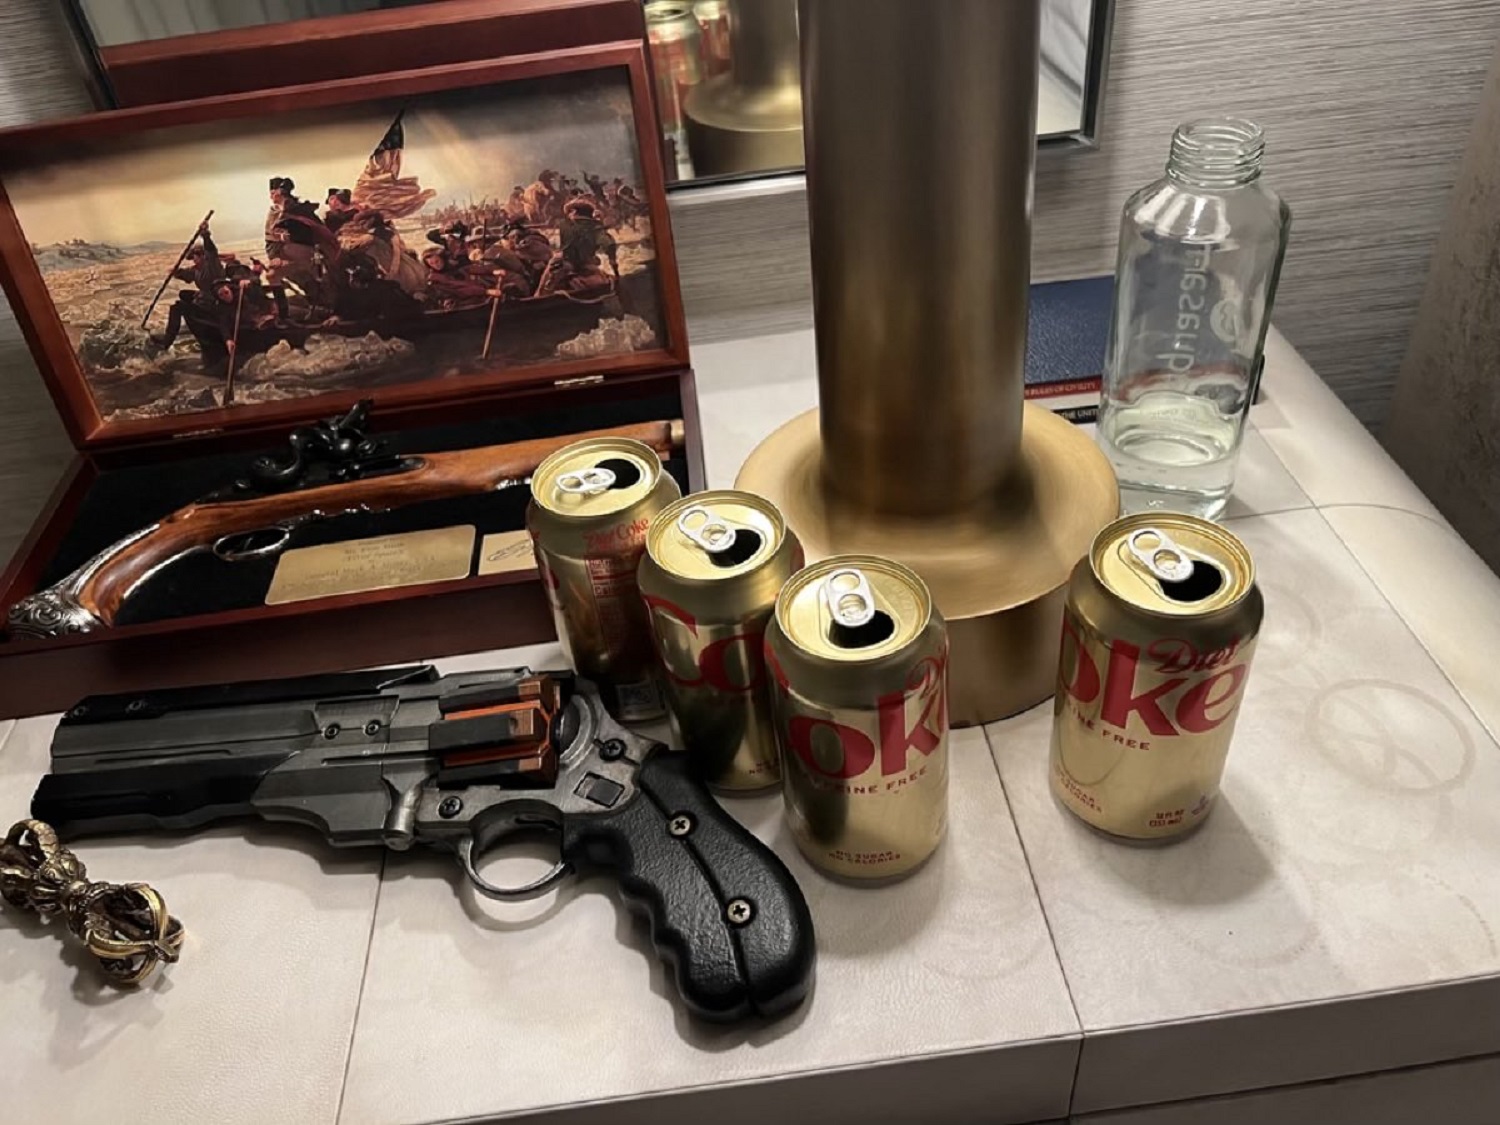 Elon Musk Keeps a Toy Gun From a Video Game on His Nightstand